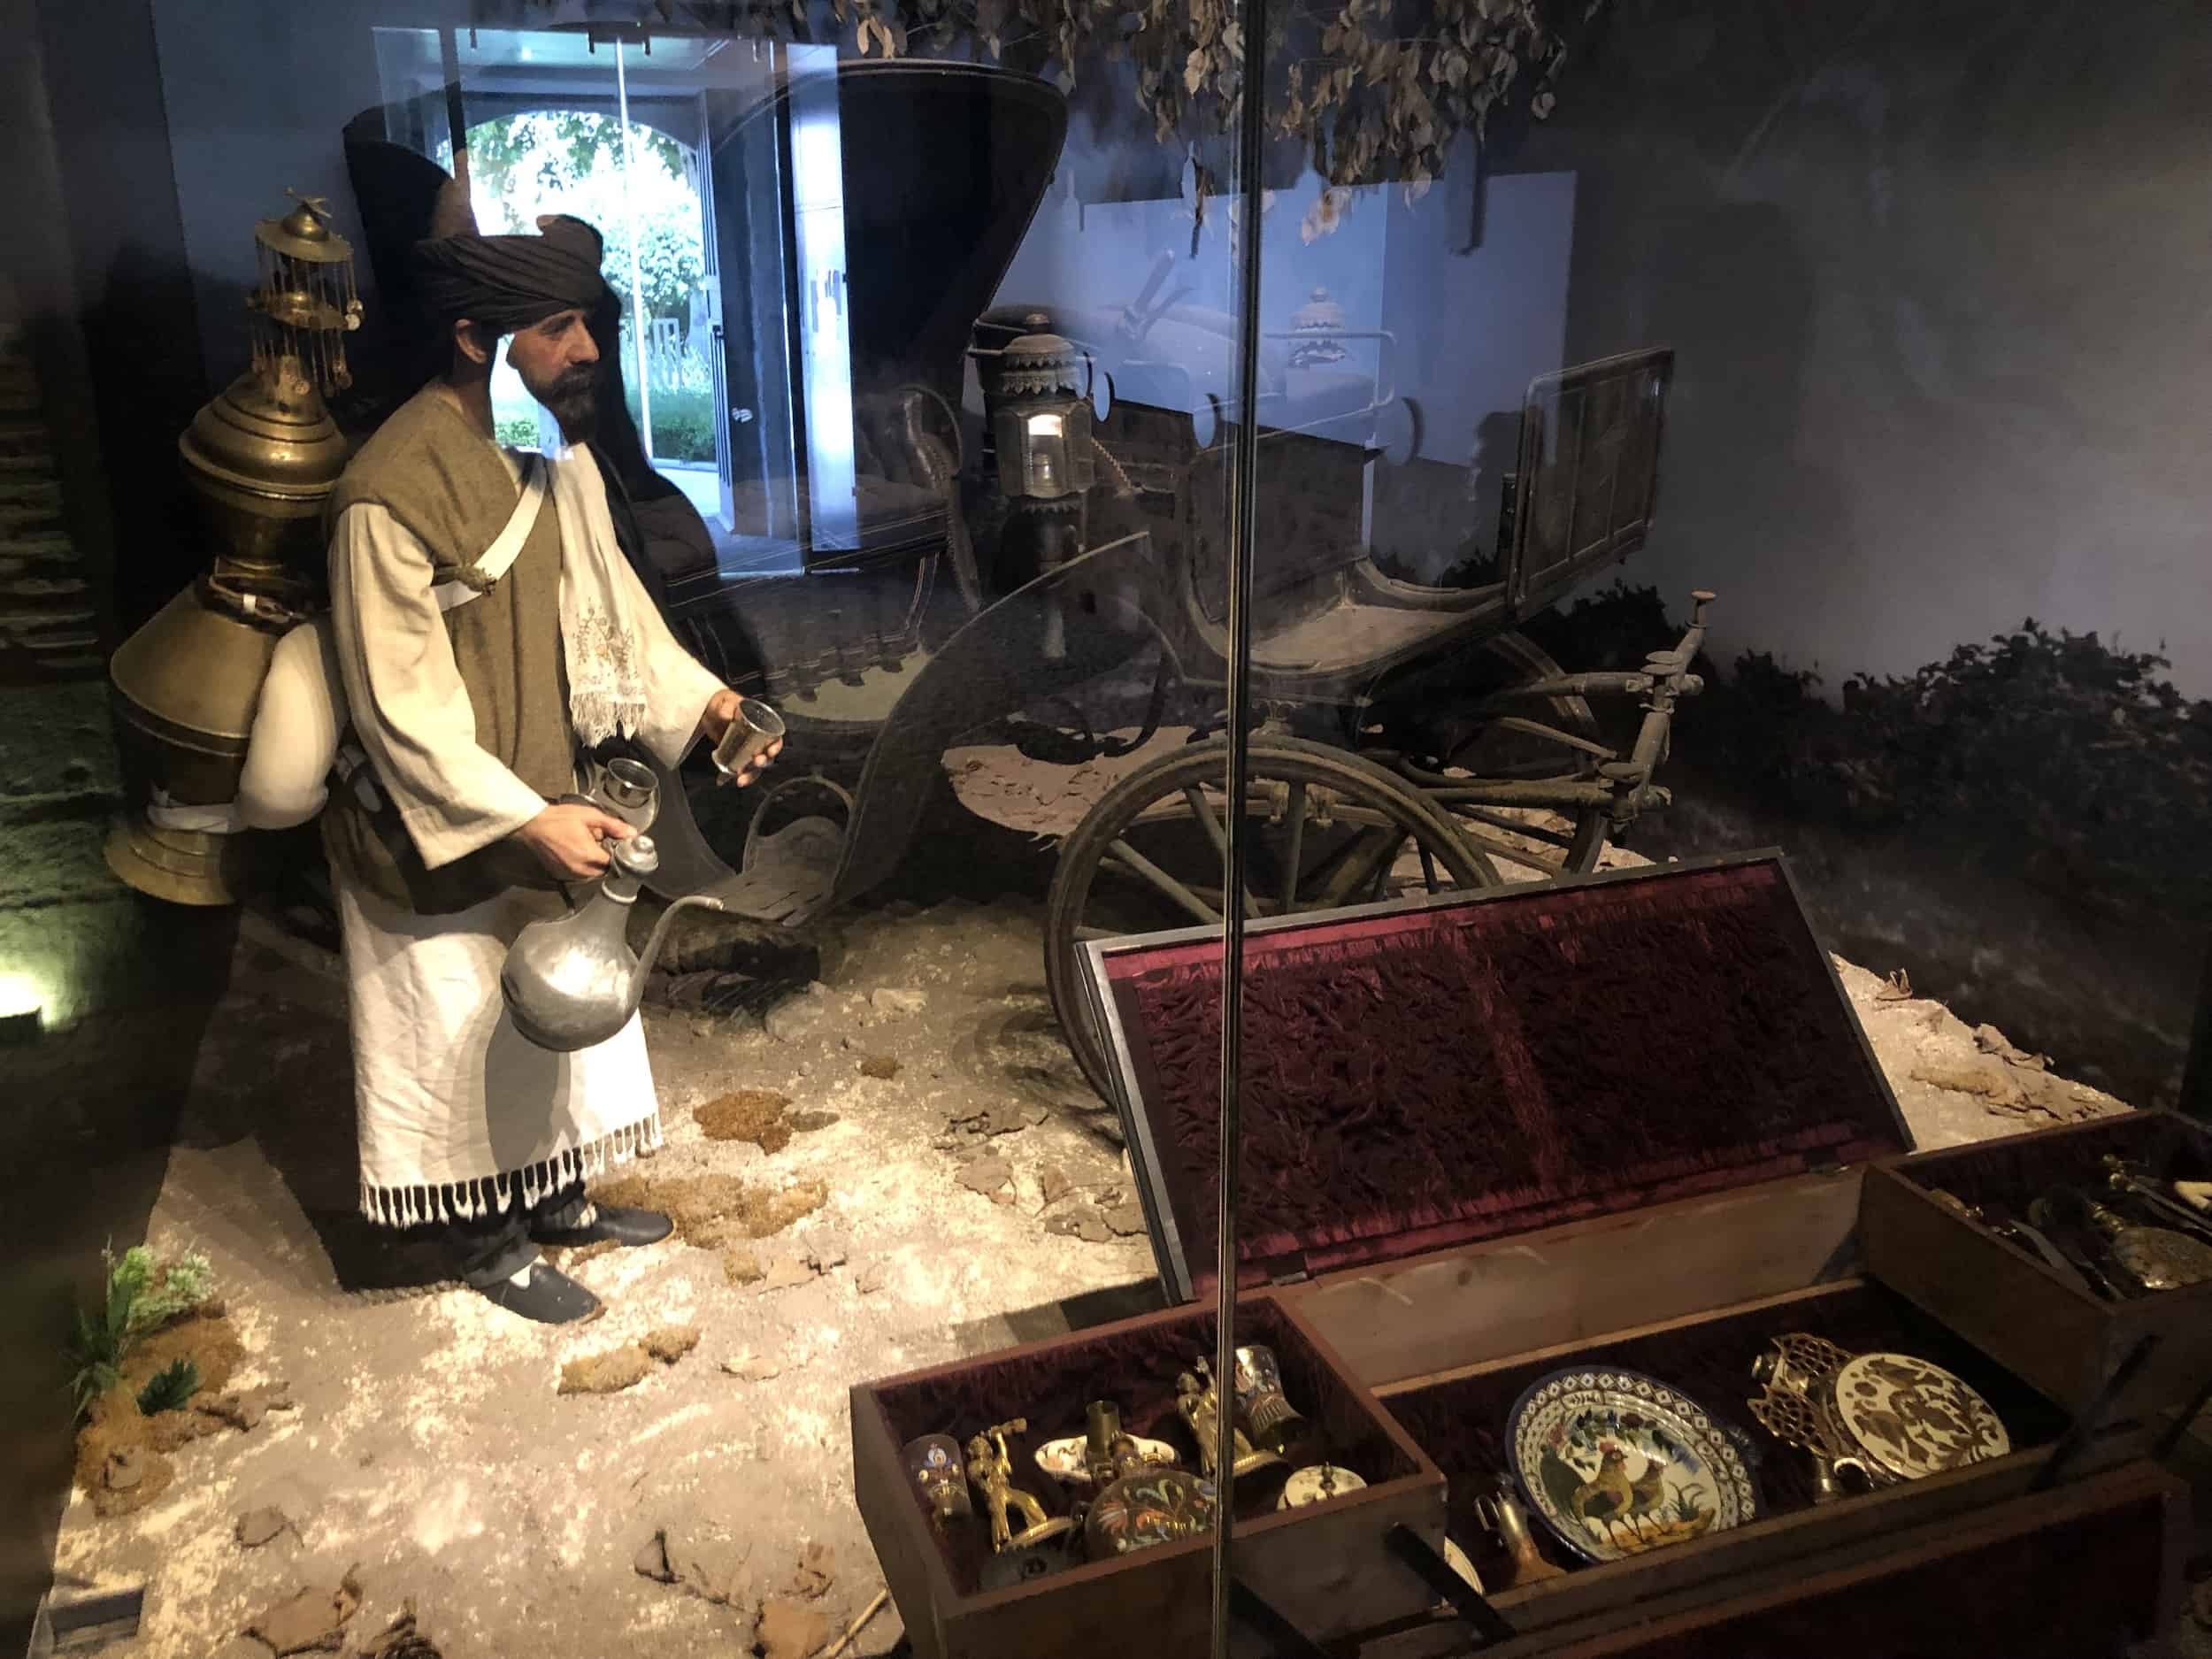 Street vendor selling coffee in the ethnographic collection at the Museum of Turkish and Islamic Arts in Istanbul, Turkey